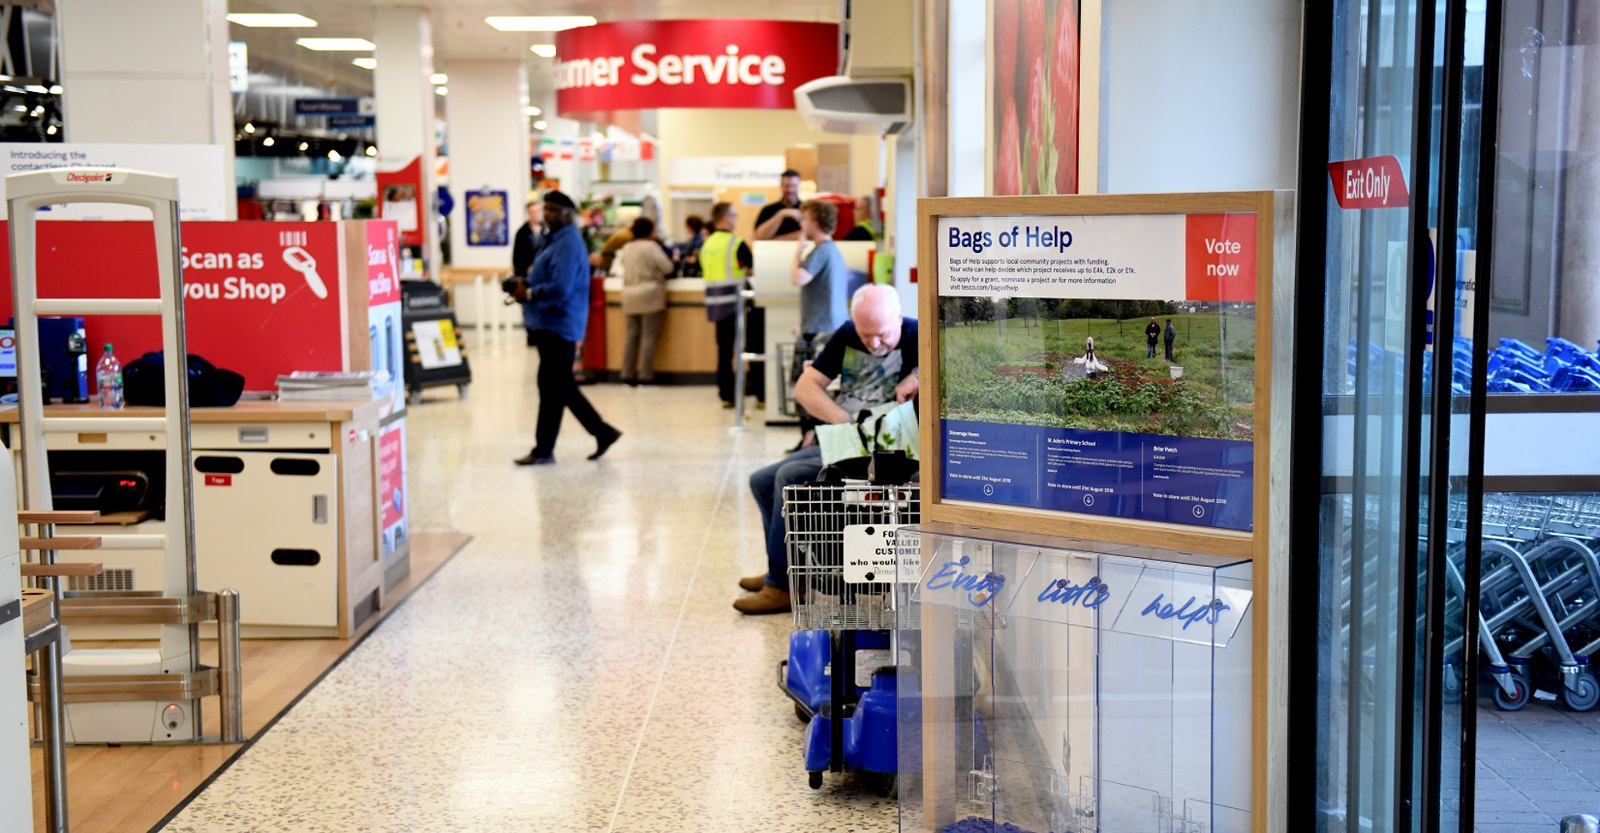 Tesco store Bags of Help voting point